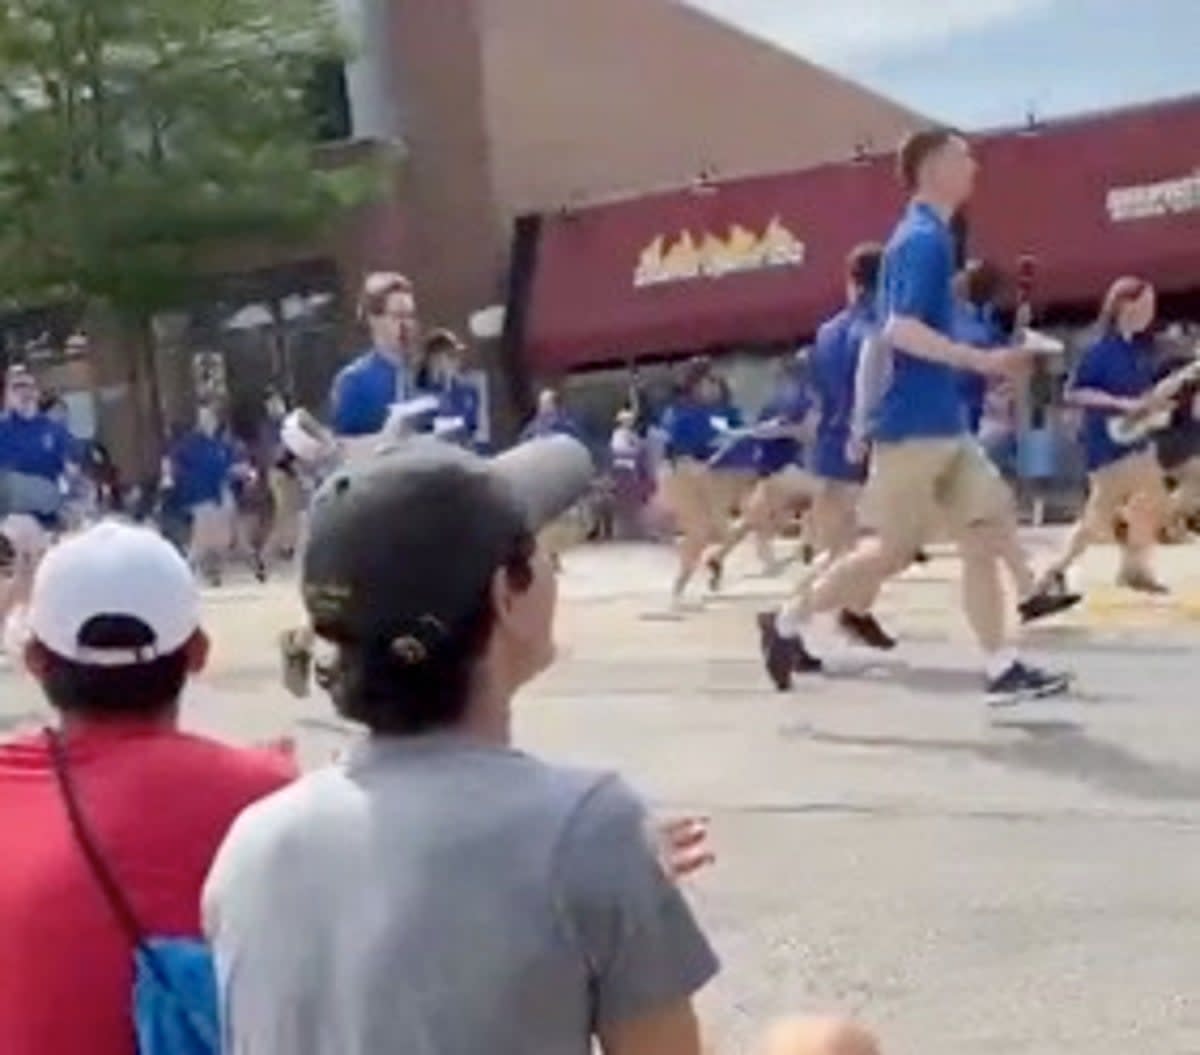 Footage posted online shows revellers and parade participants flee as gunfire erupts (TikTok/Leonarcos11)